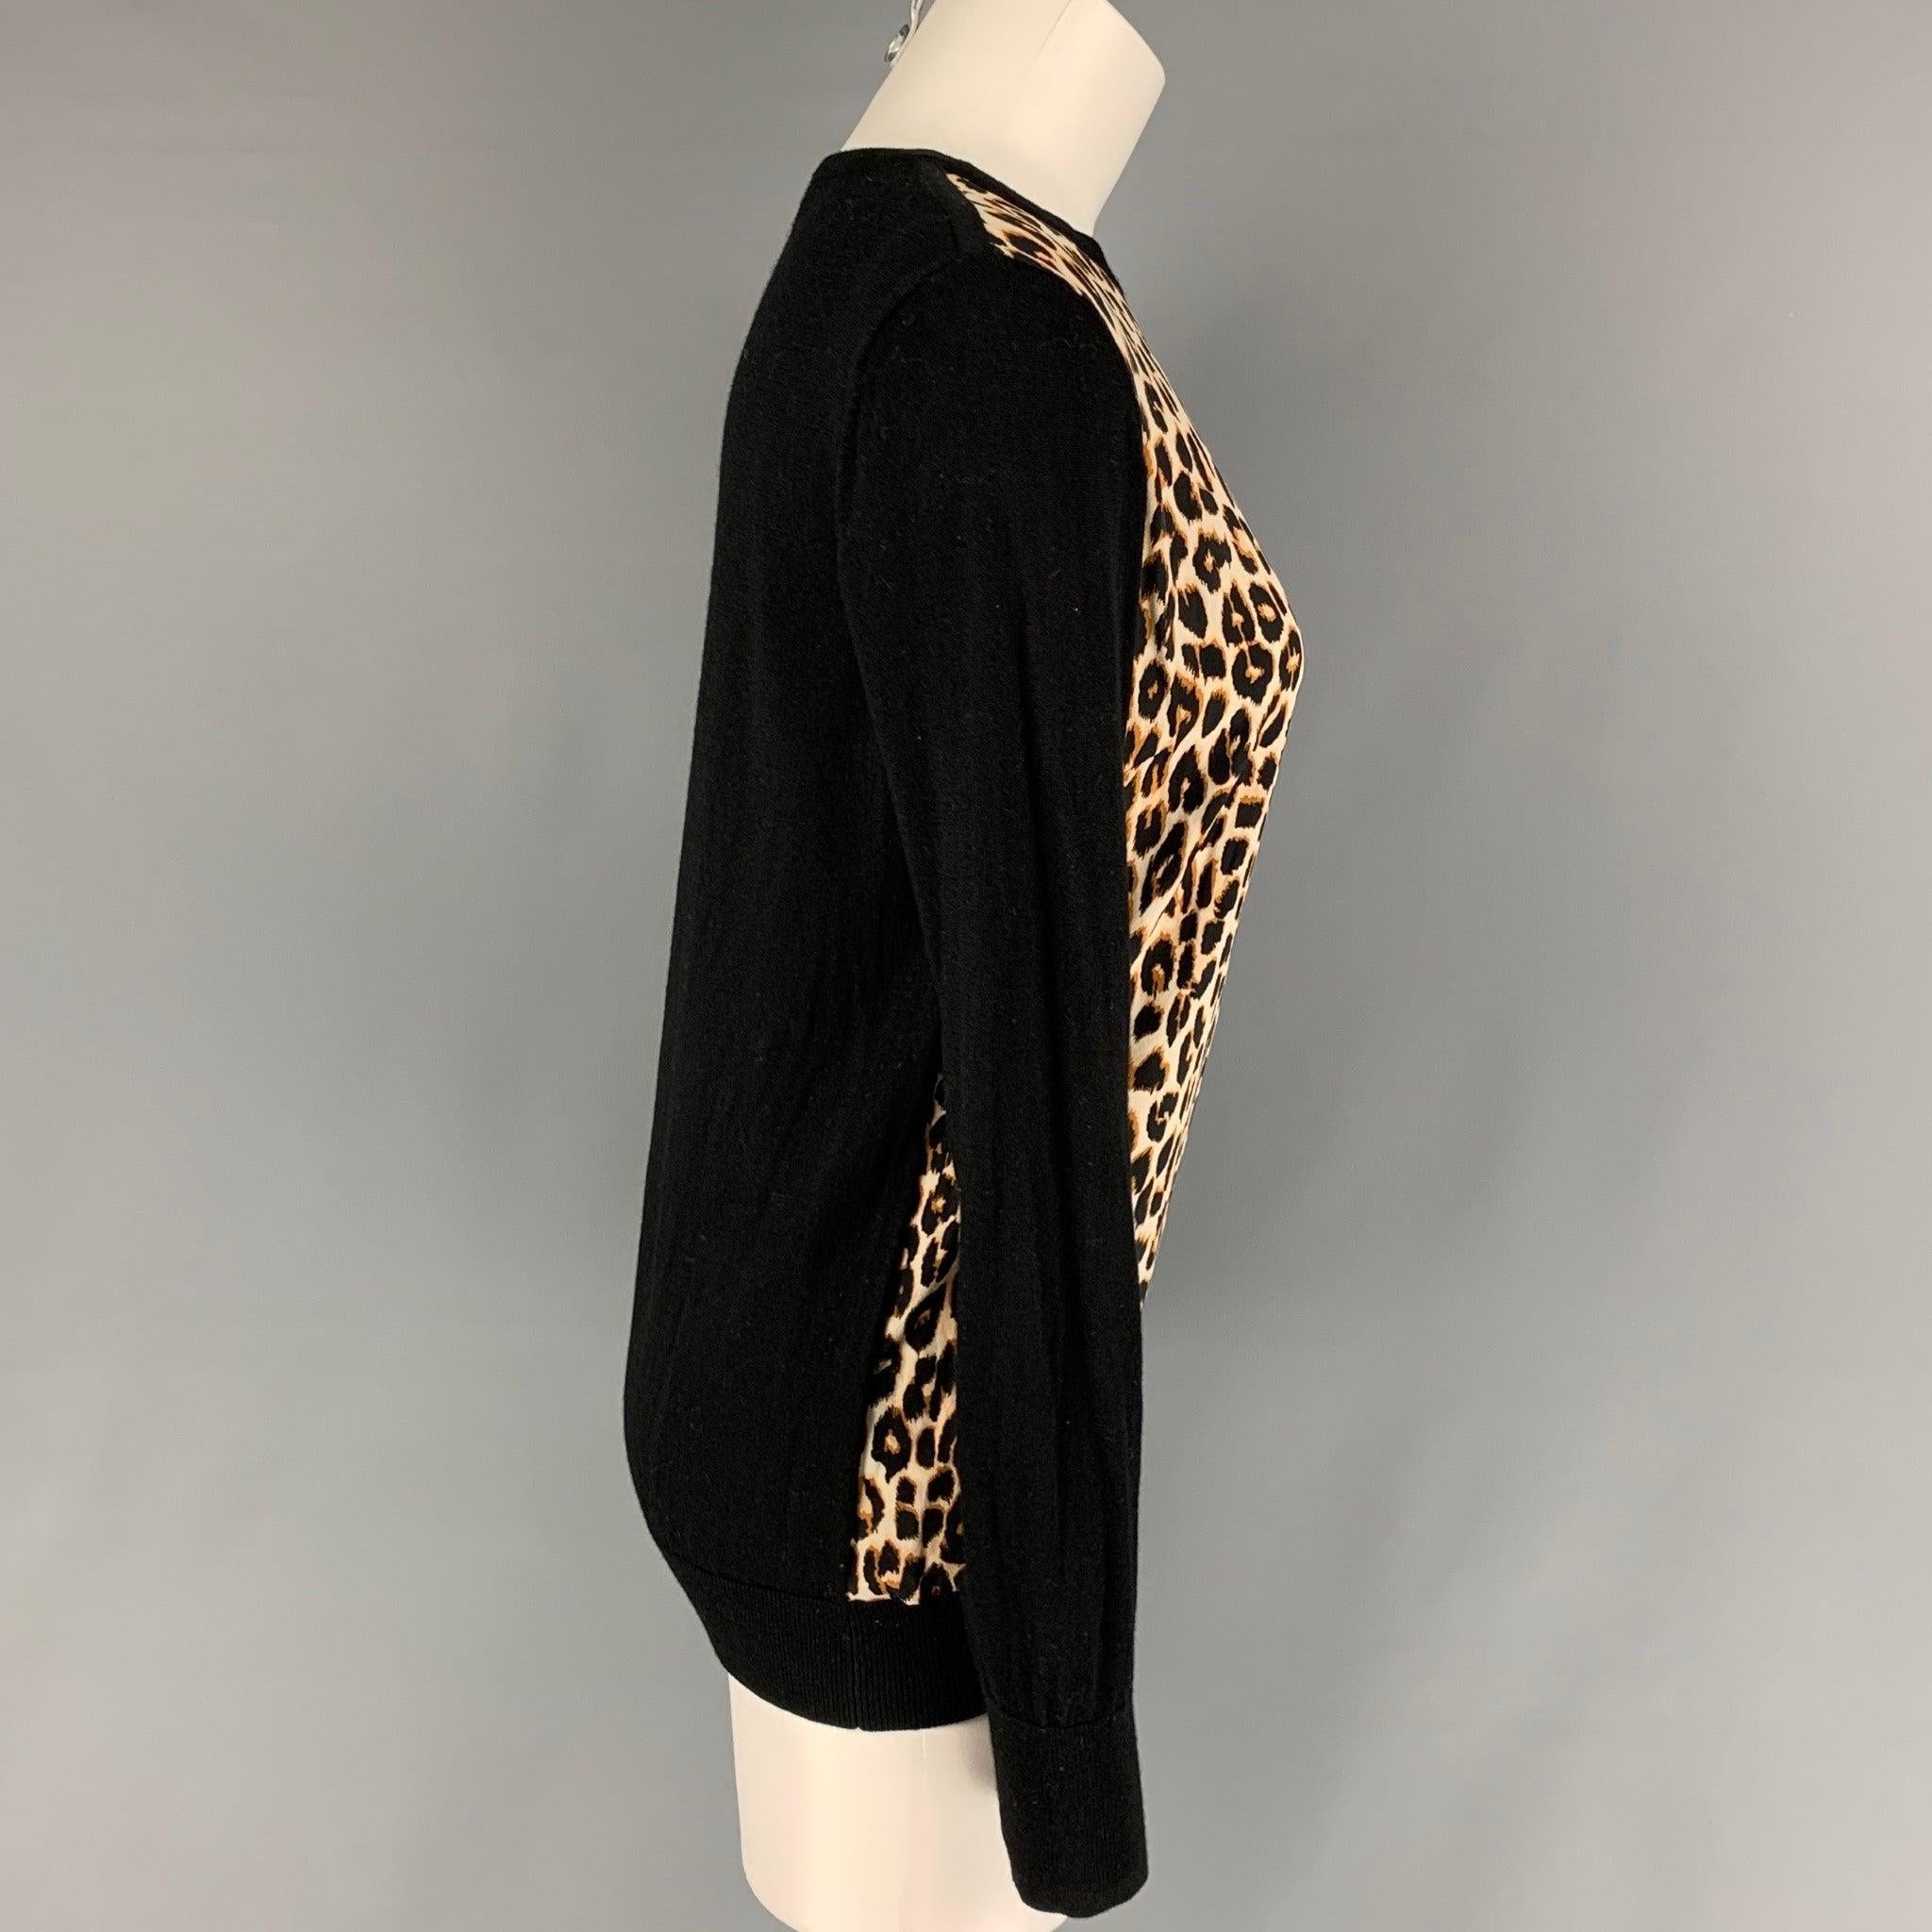 EQUIPMENT pullover comes in a black & tan leopard print featuring a crew-neck.
Very Good
Pre-Owned Condition. 

Marked:   M  

Measurements: 
 
Shoulder: 15.5 inches  Bust: 38 inches  Sleeve: 26.5 inches  Length: 25 inches 
  
  
 
Reference: